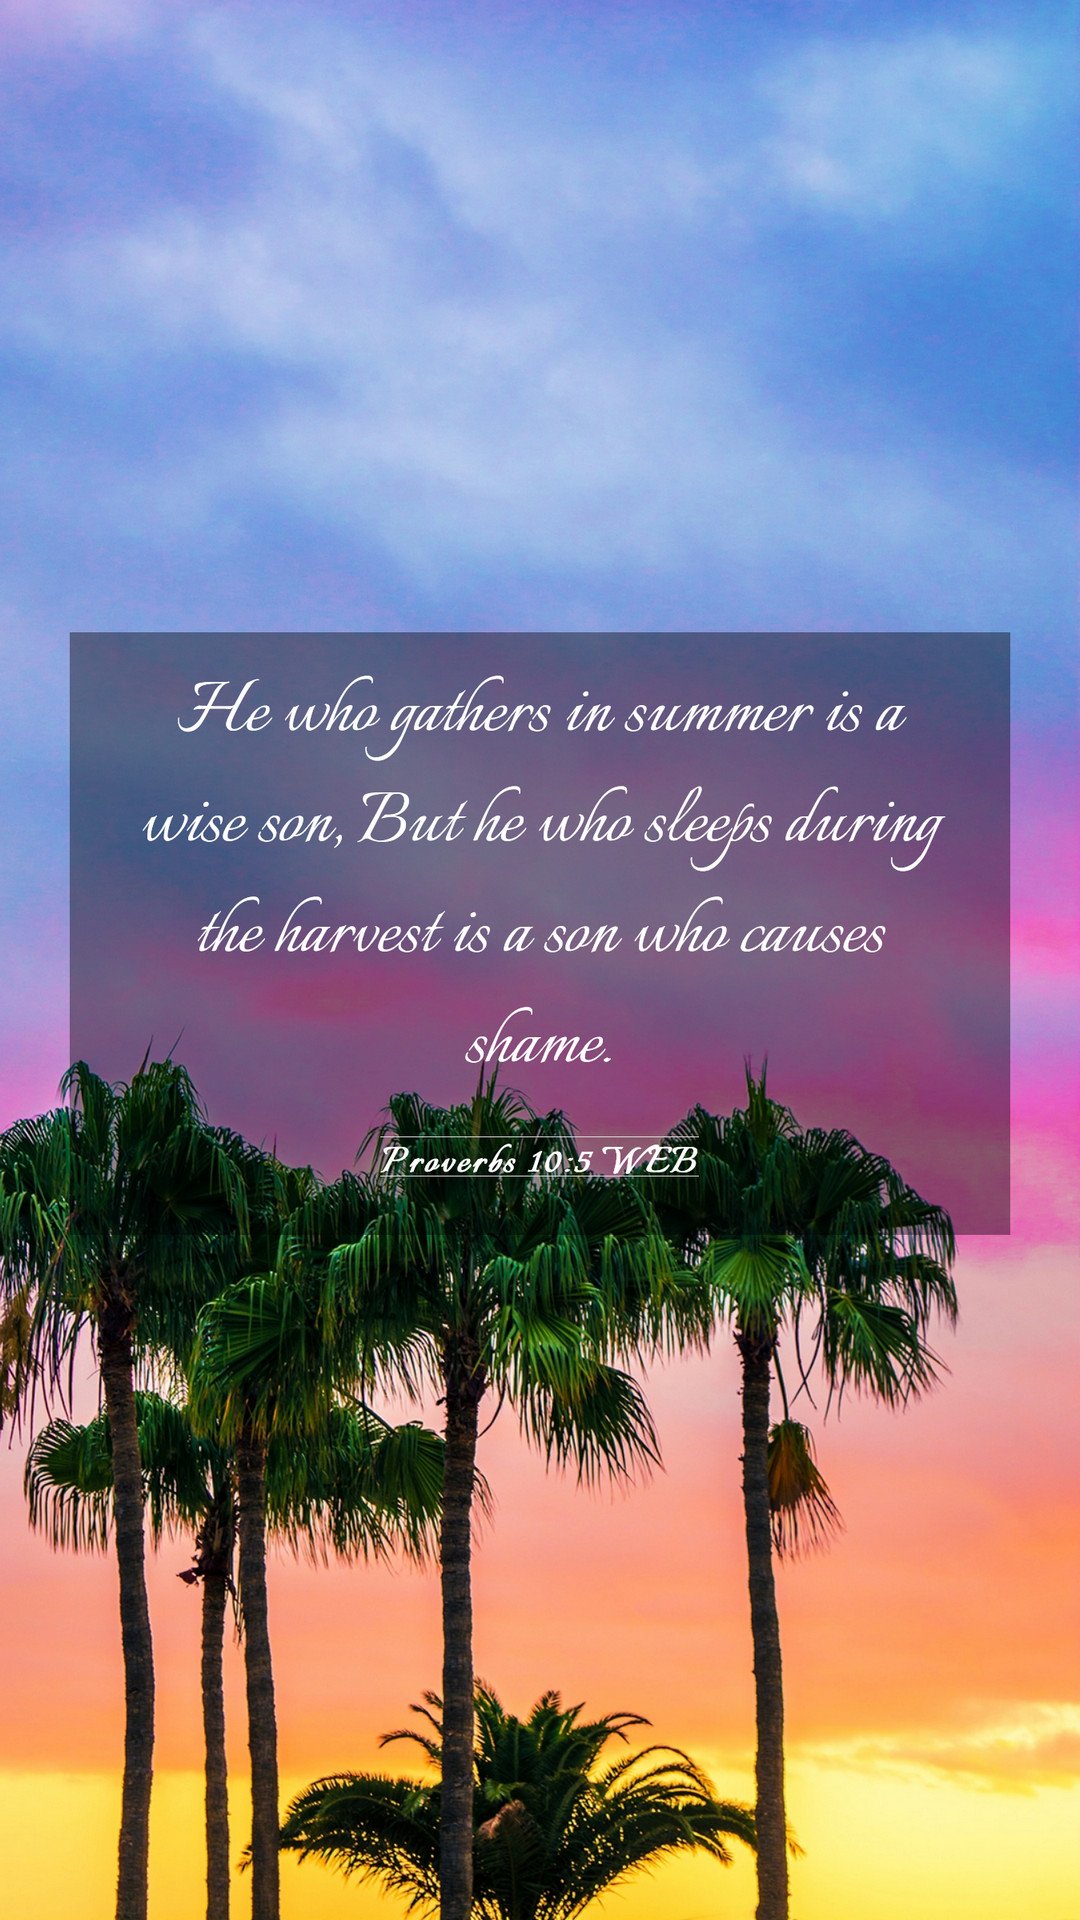 Proverbs 10:5 WEB Mobile Phone Wallpaper who gathers in summer is a wise son, But he